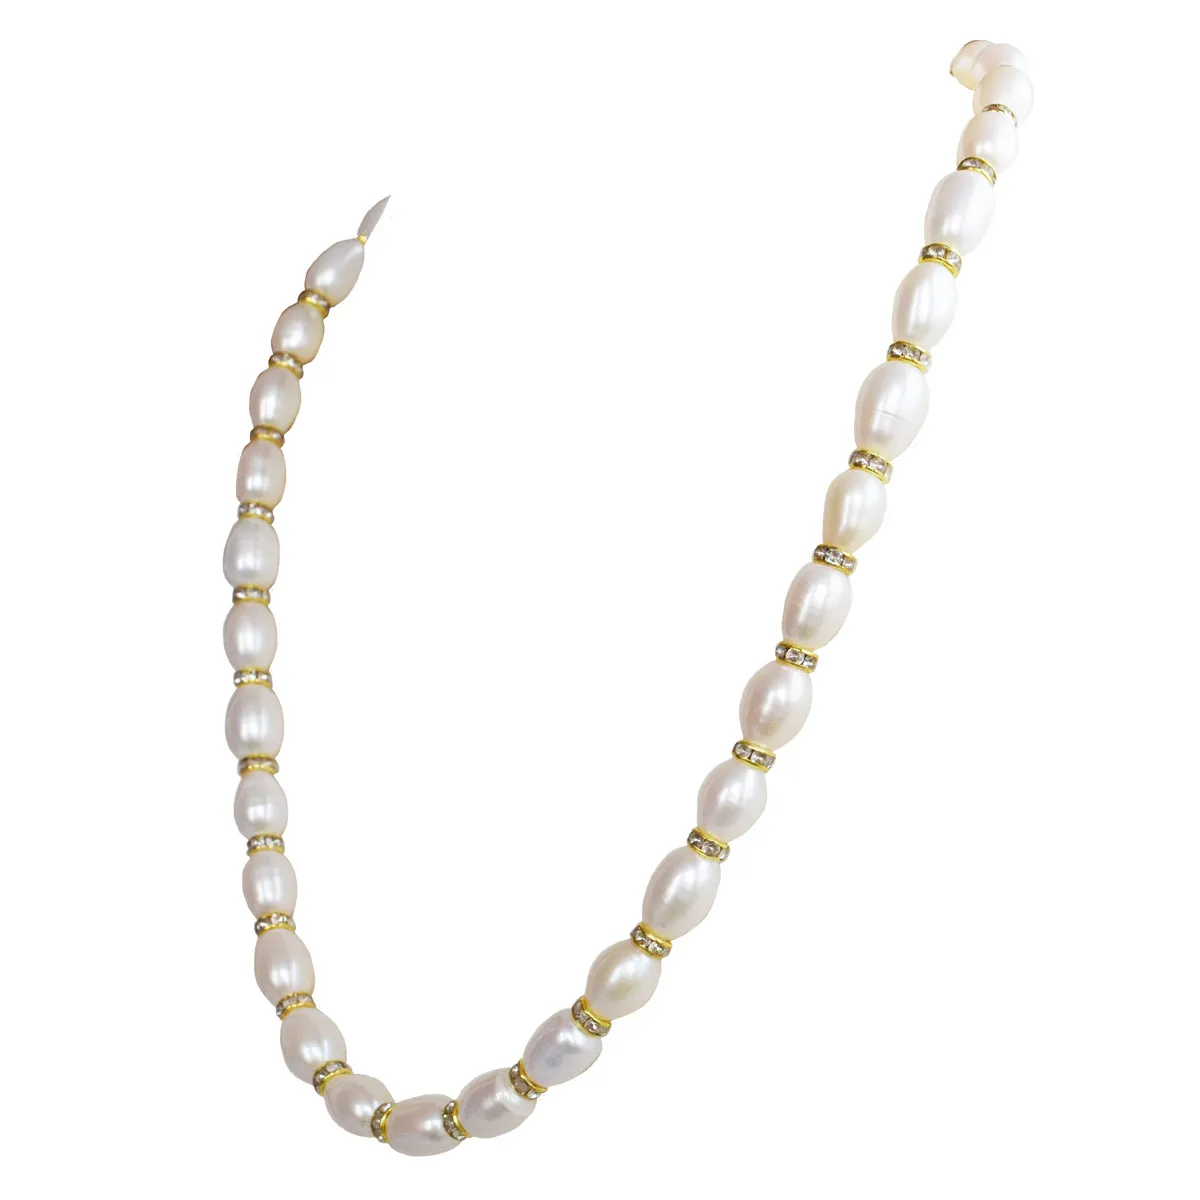 Golden Harmony: Elongated Pearl & Gold-Plated Chakri Necklace (SN1045)